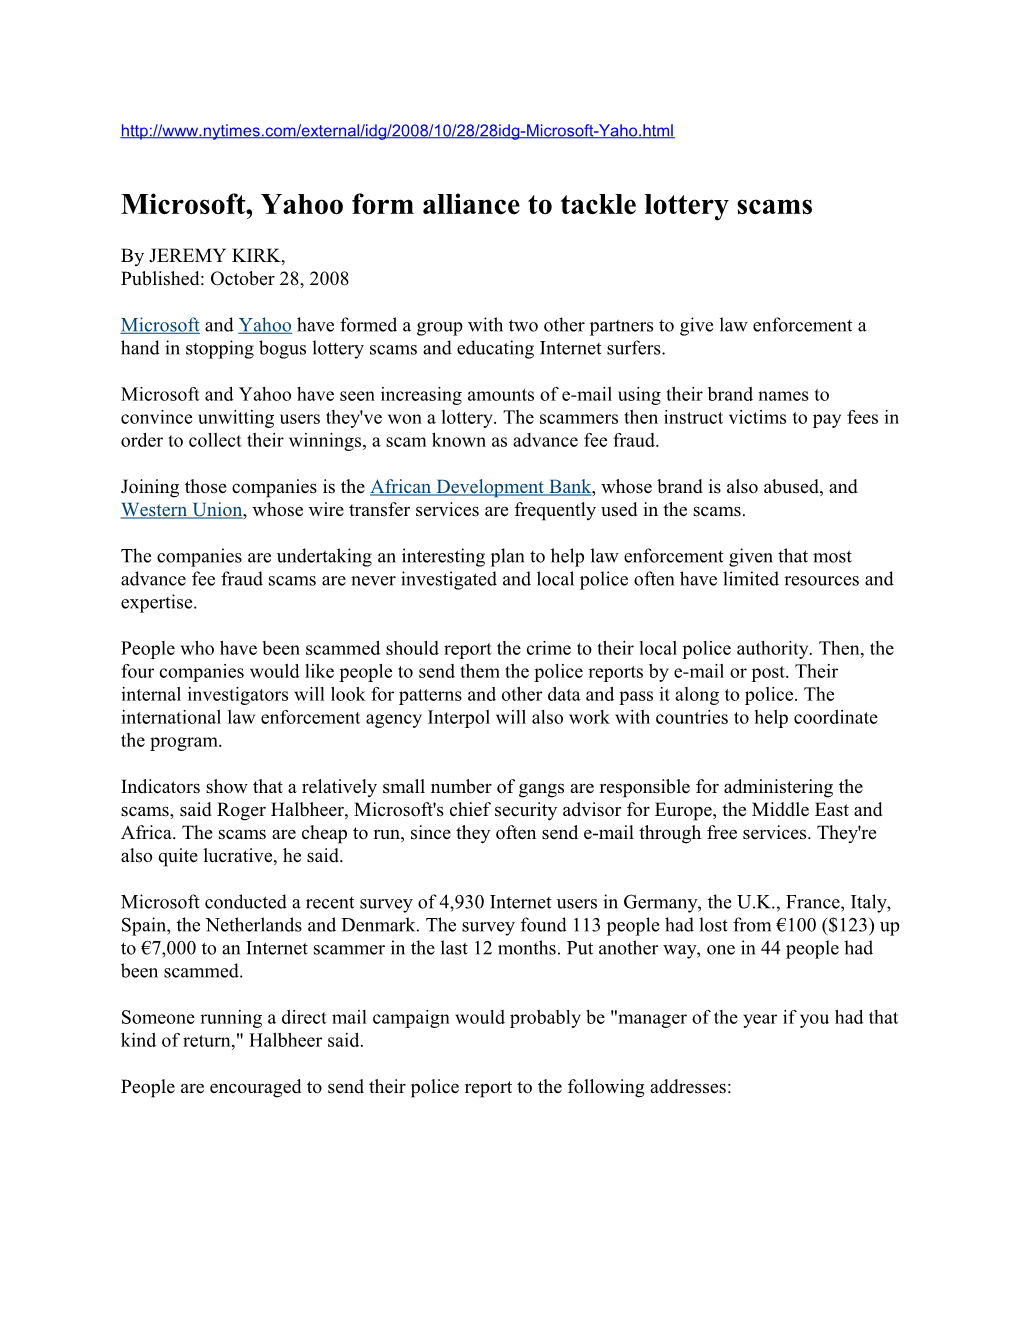 Microsoft, Yahoo Form Alliance to Tackle Lottery Scams